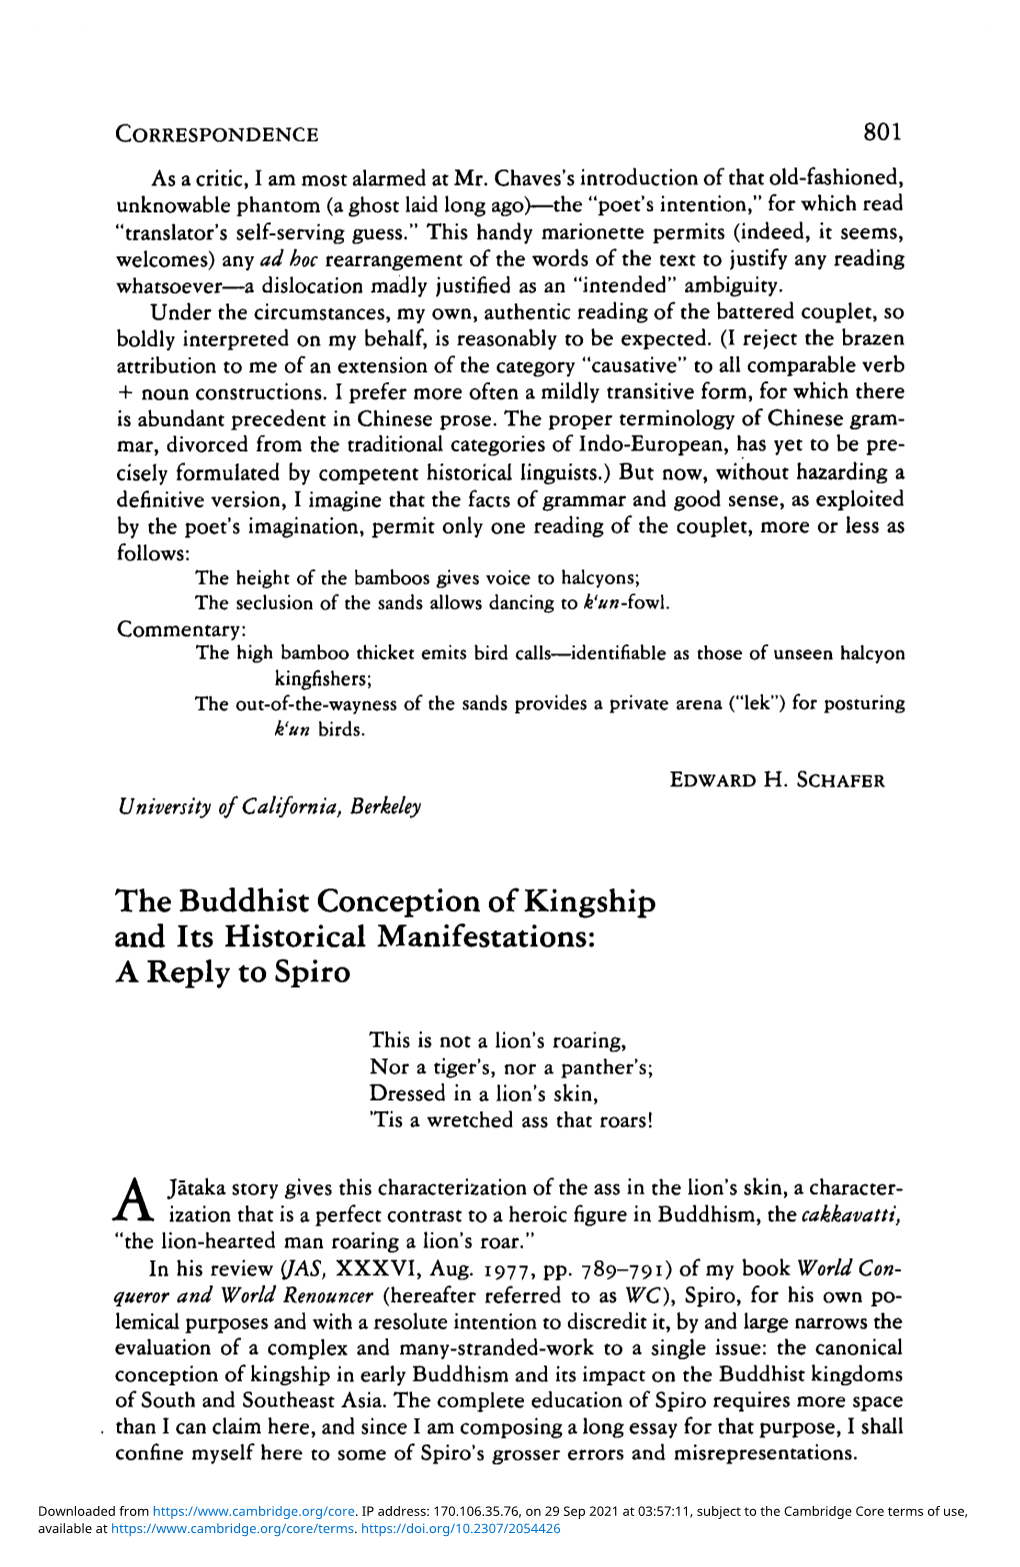 The Buddhist Conception of Kingship and Its Historical Manifestations: a Reply to Spiro